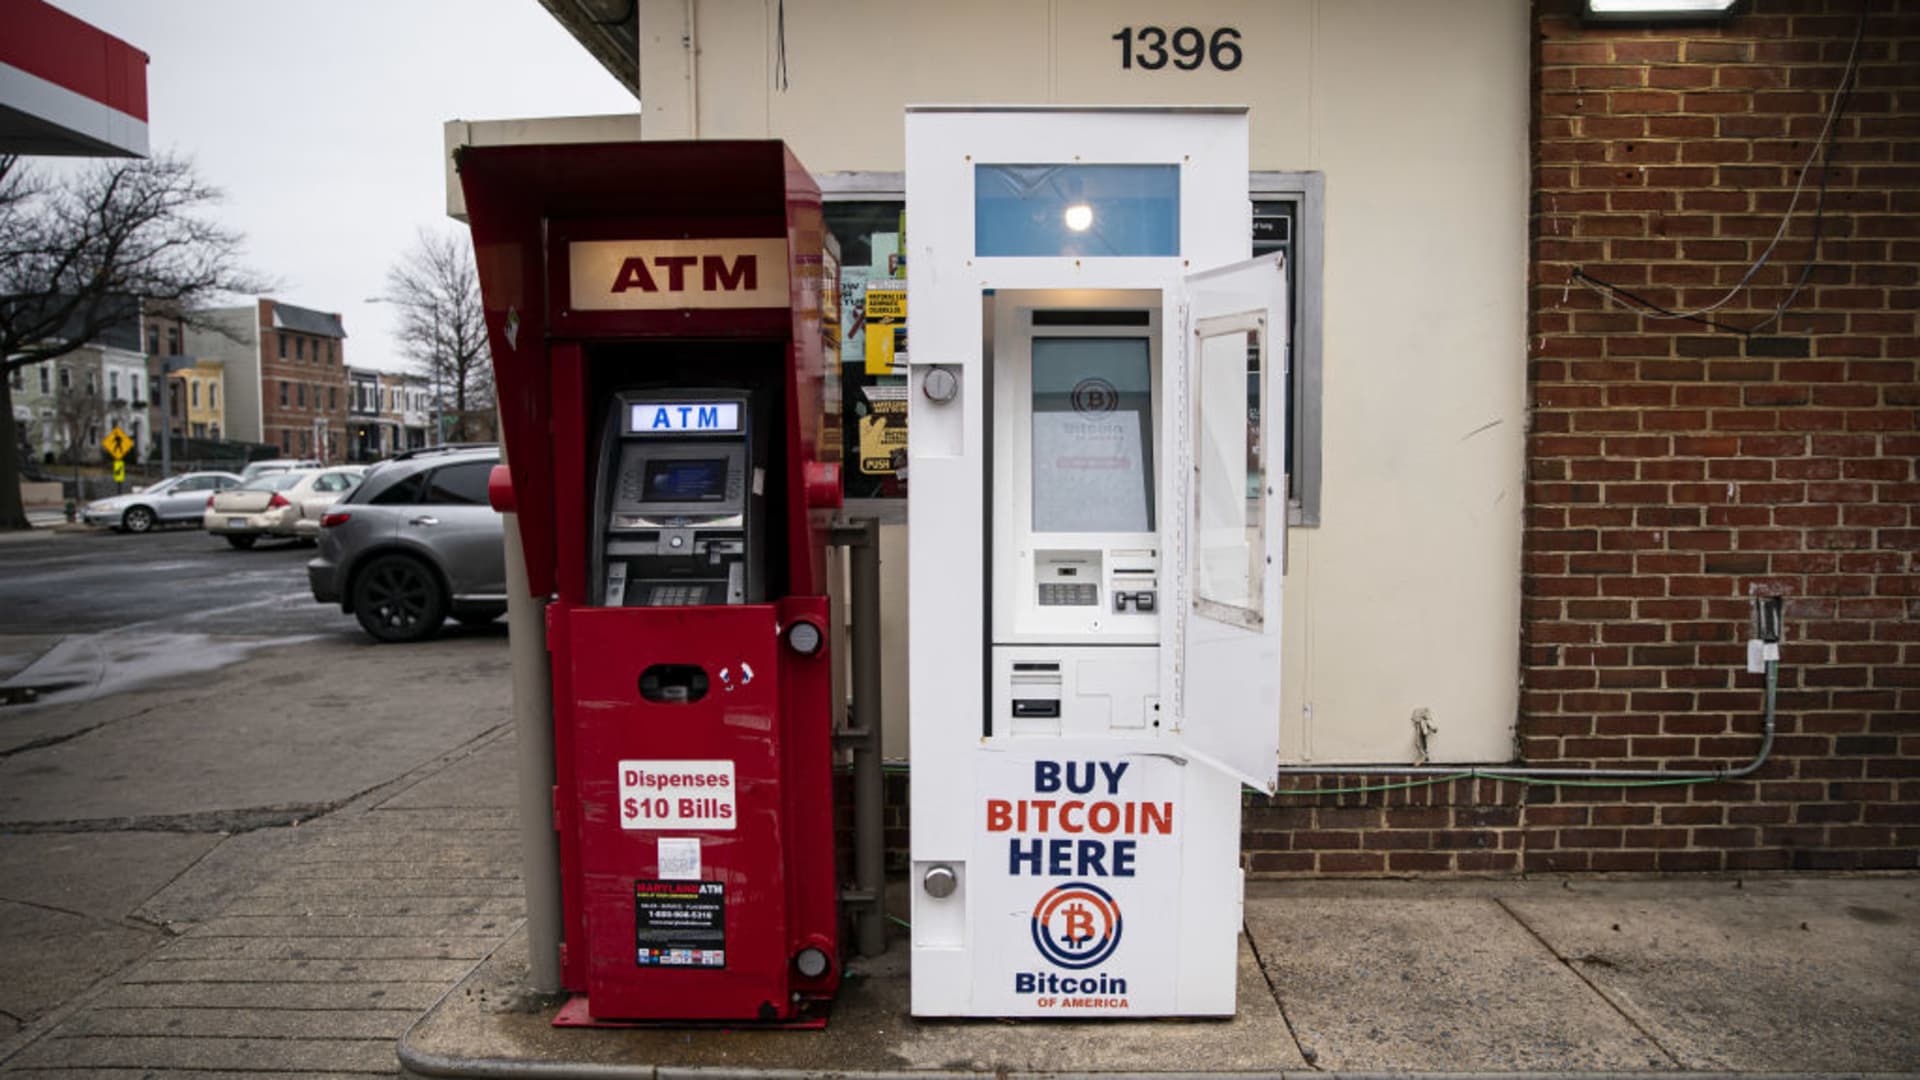 A Bitcoin automated teller machine (ATM) at a gas station in Washington, DC, on Jan. 19, 2023.